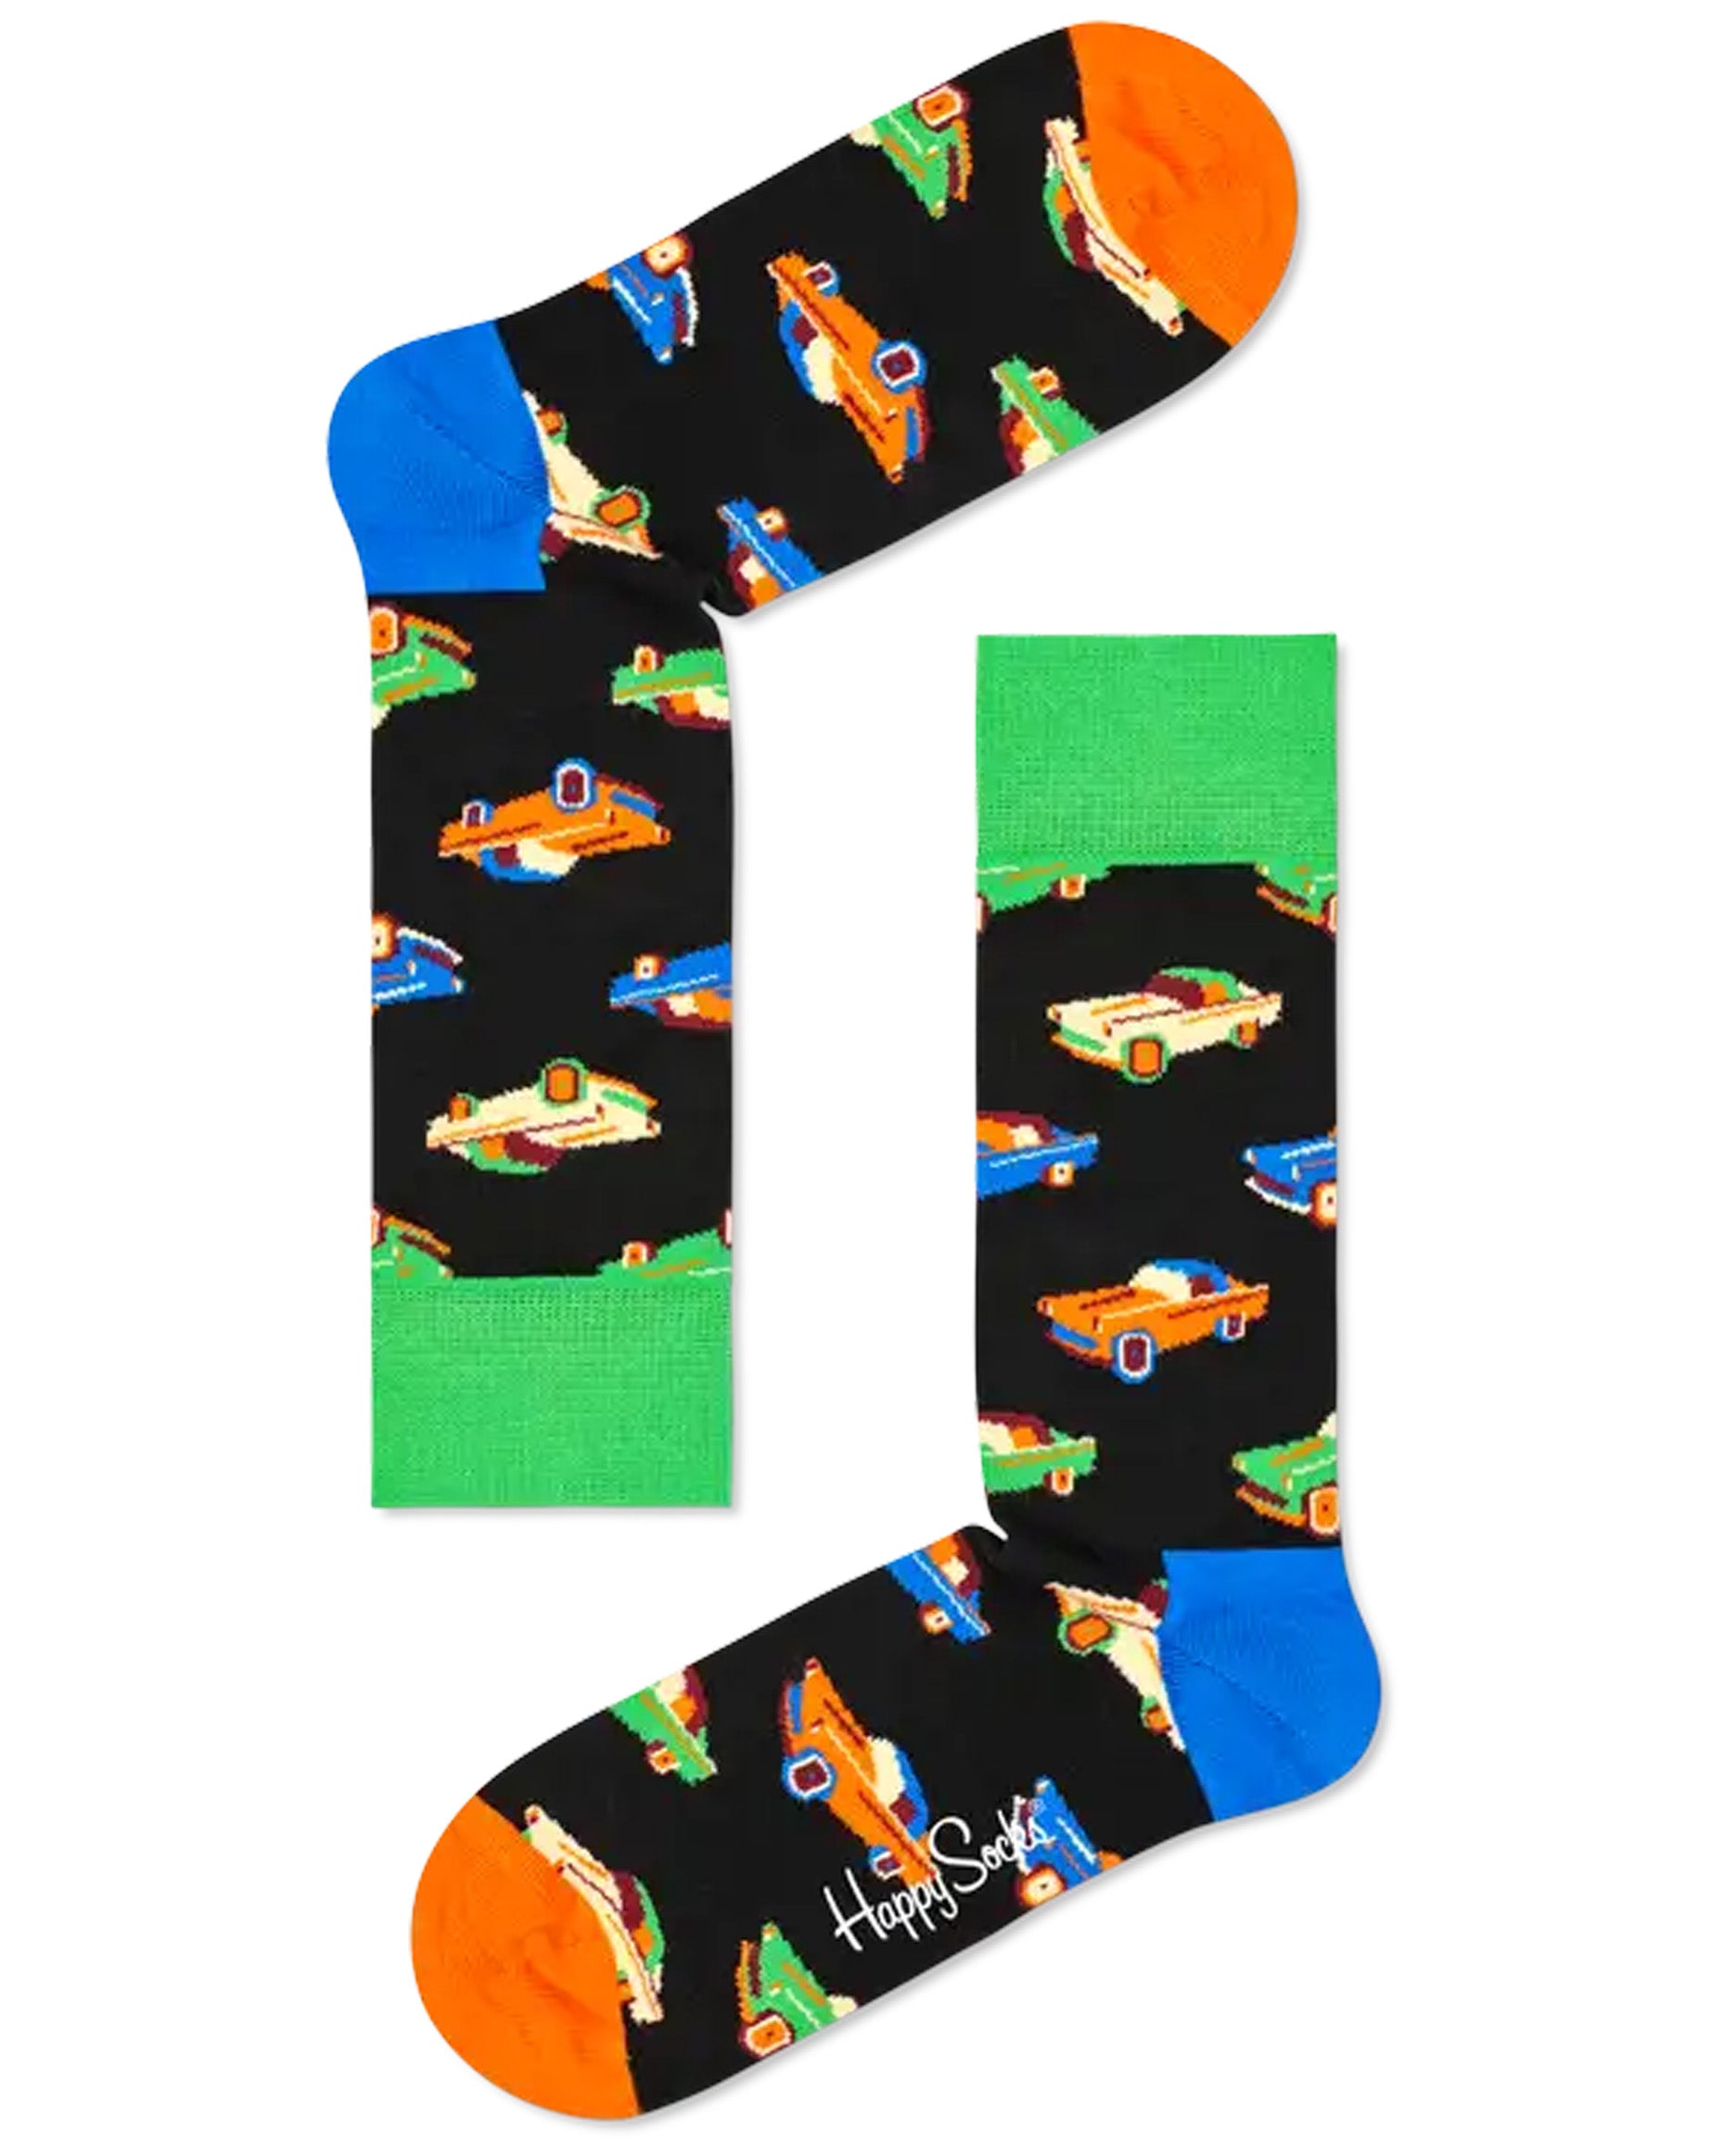 Happy Socks Vintage Car Sock - Black cotton crew length ankle socks with a vintage sports car pattern in blue, orange, green, cream and wine, green cuff, blue heel and orange toe.